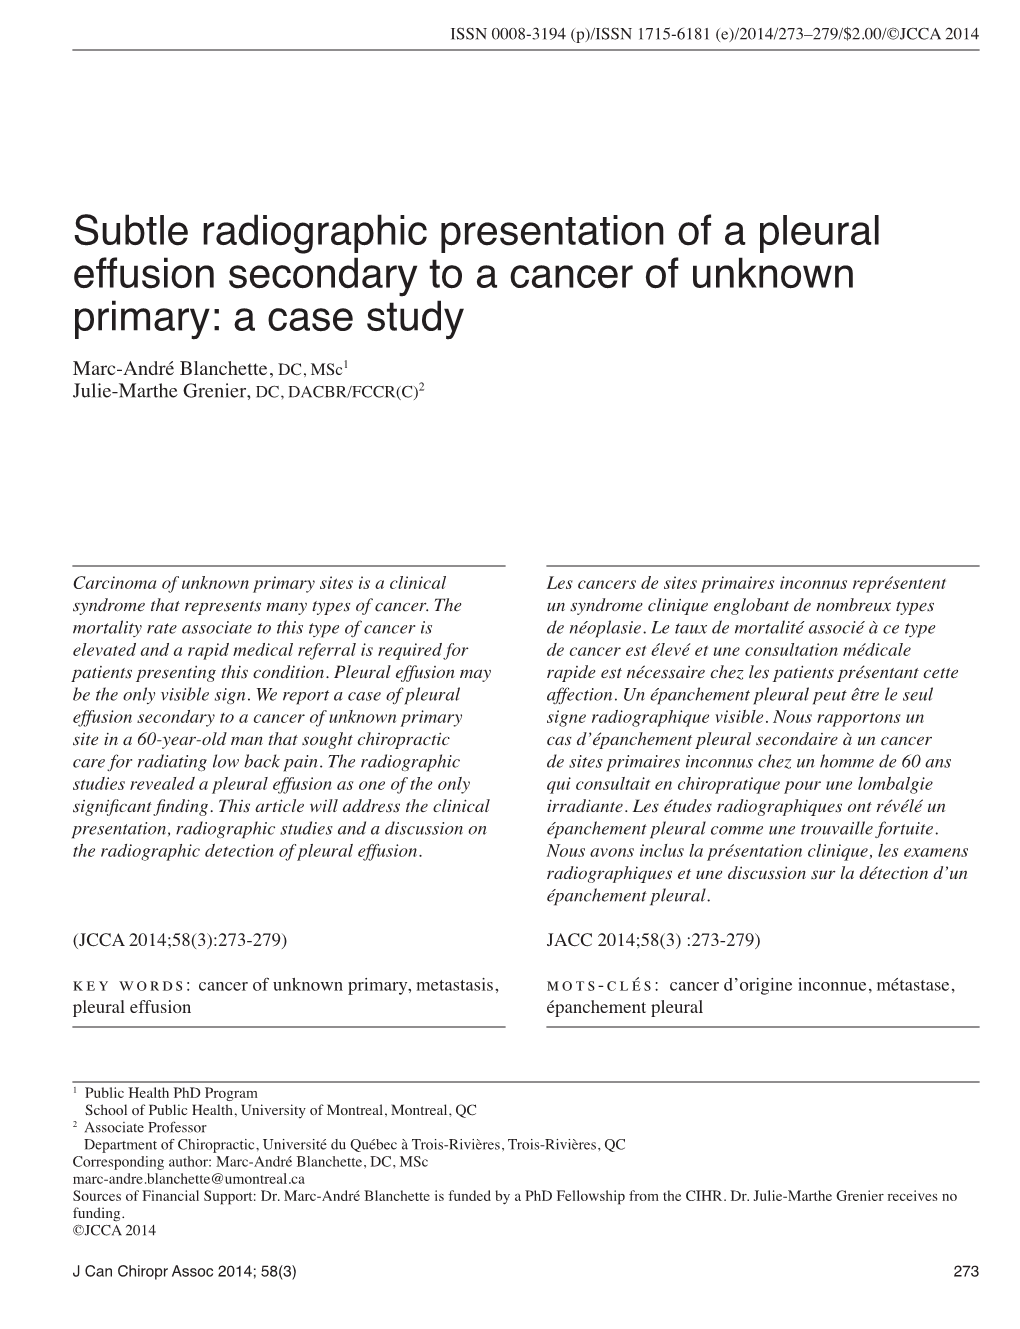 Subtle Radiographic Presentation of a Pleural Effusion Secondary to A